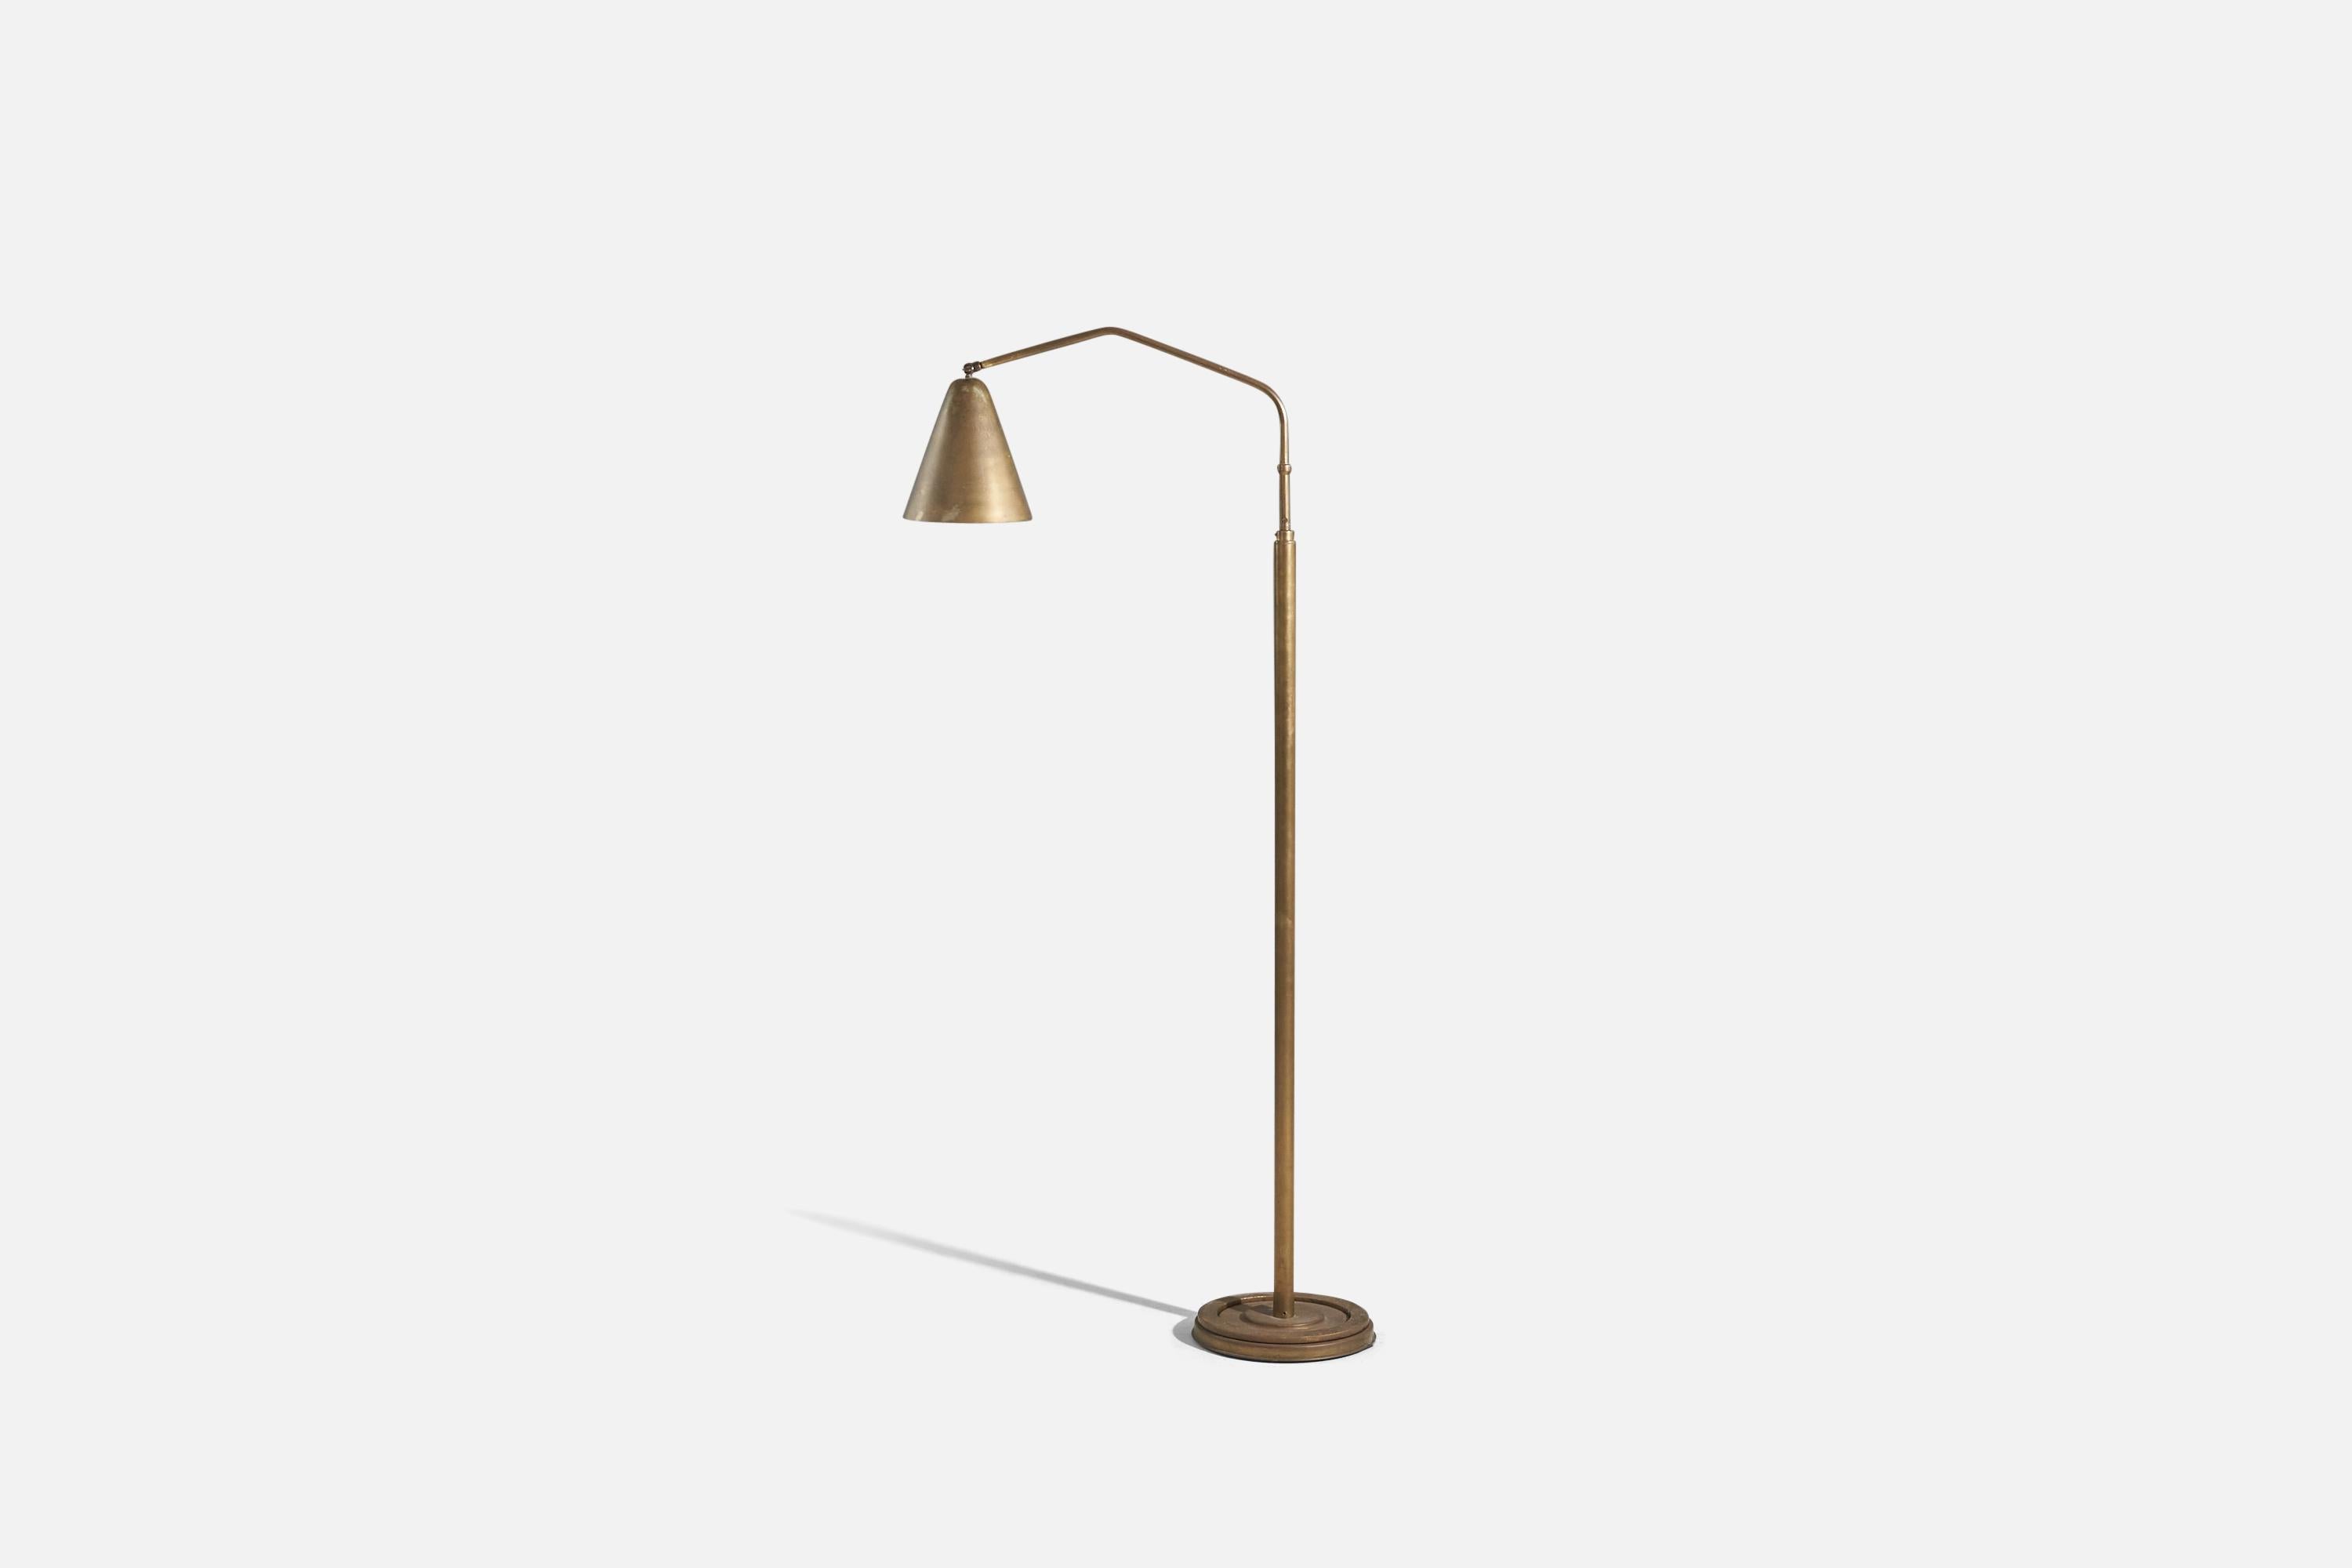 An adjustable brass floor lamp designed and produced in Italy, 1950s.

Variable dimensions, measured as illustrated in the first image.

Socket takes standard E-26 medium base bulb.
There is no maximum wattage stated on the fixture.